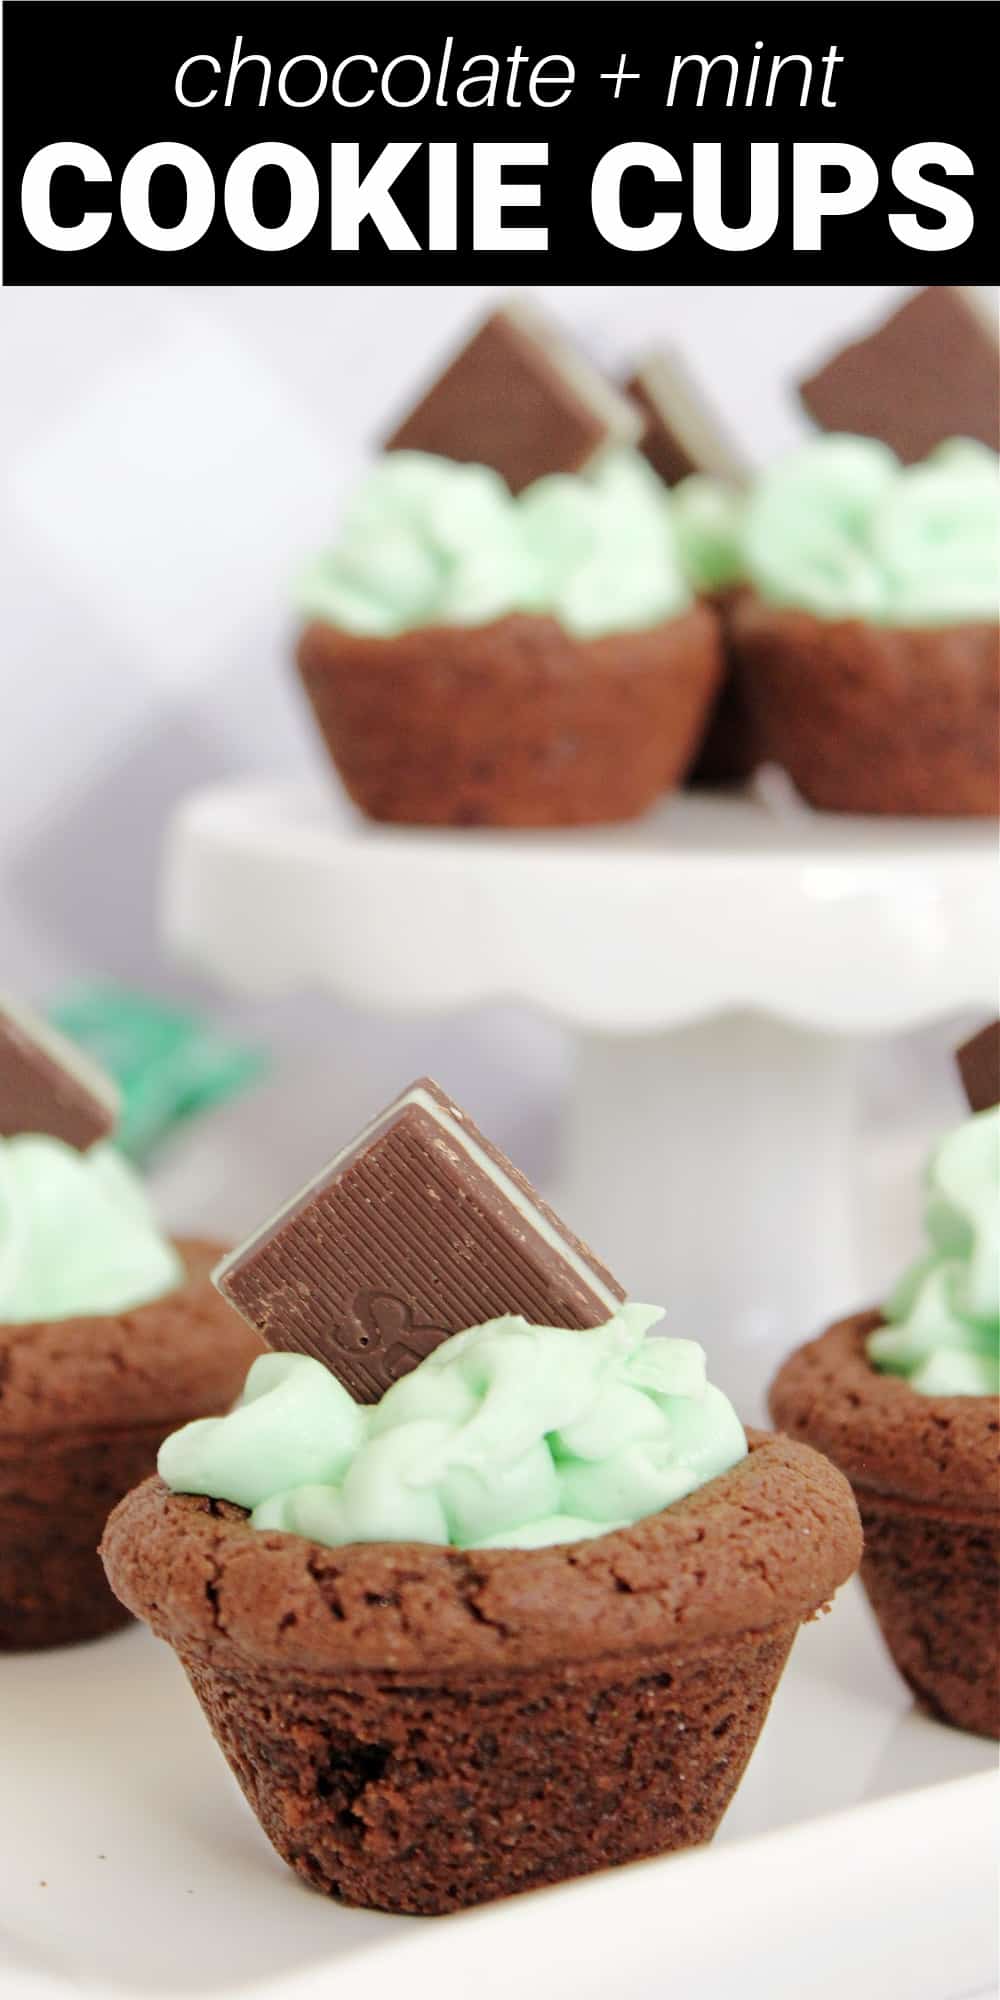 Chocolate mint cookie cups are a simple chocolate cookie dough pressed into a mini-muffin pan making a hole to fill with creamy mint buttercream frosting. Topped with an Andes mint, these are a cute chocolate mint dessert.